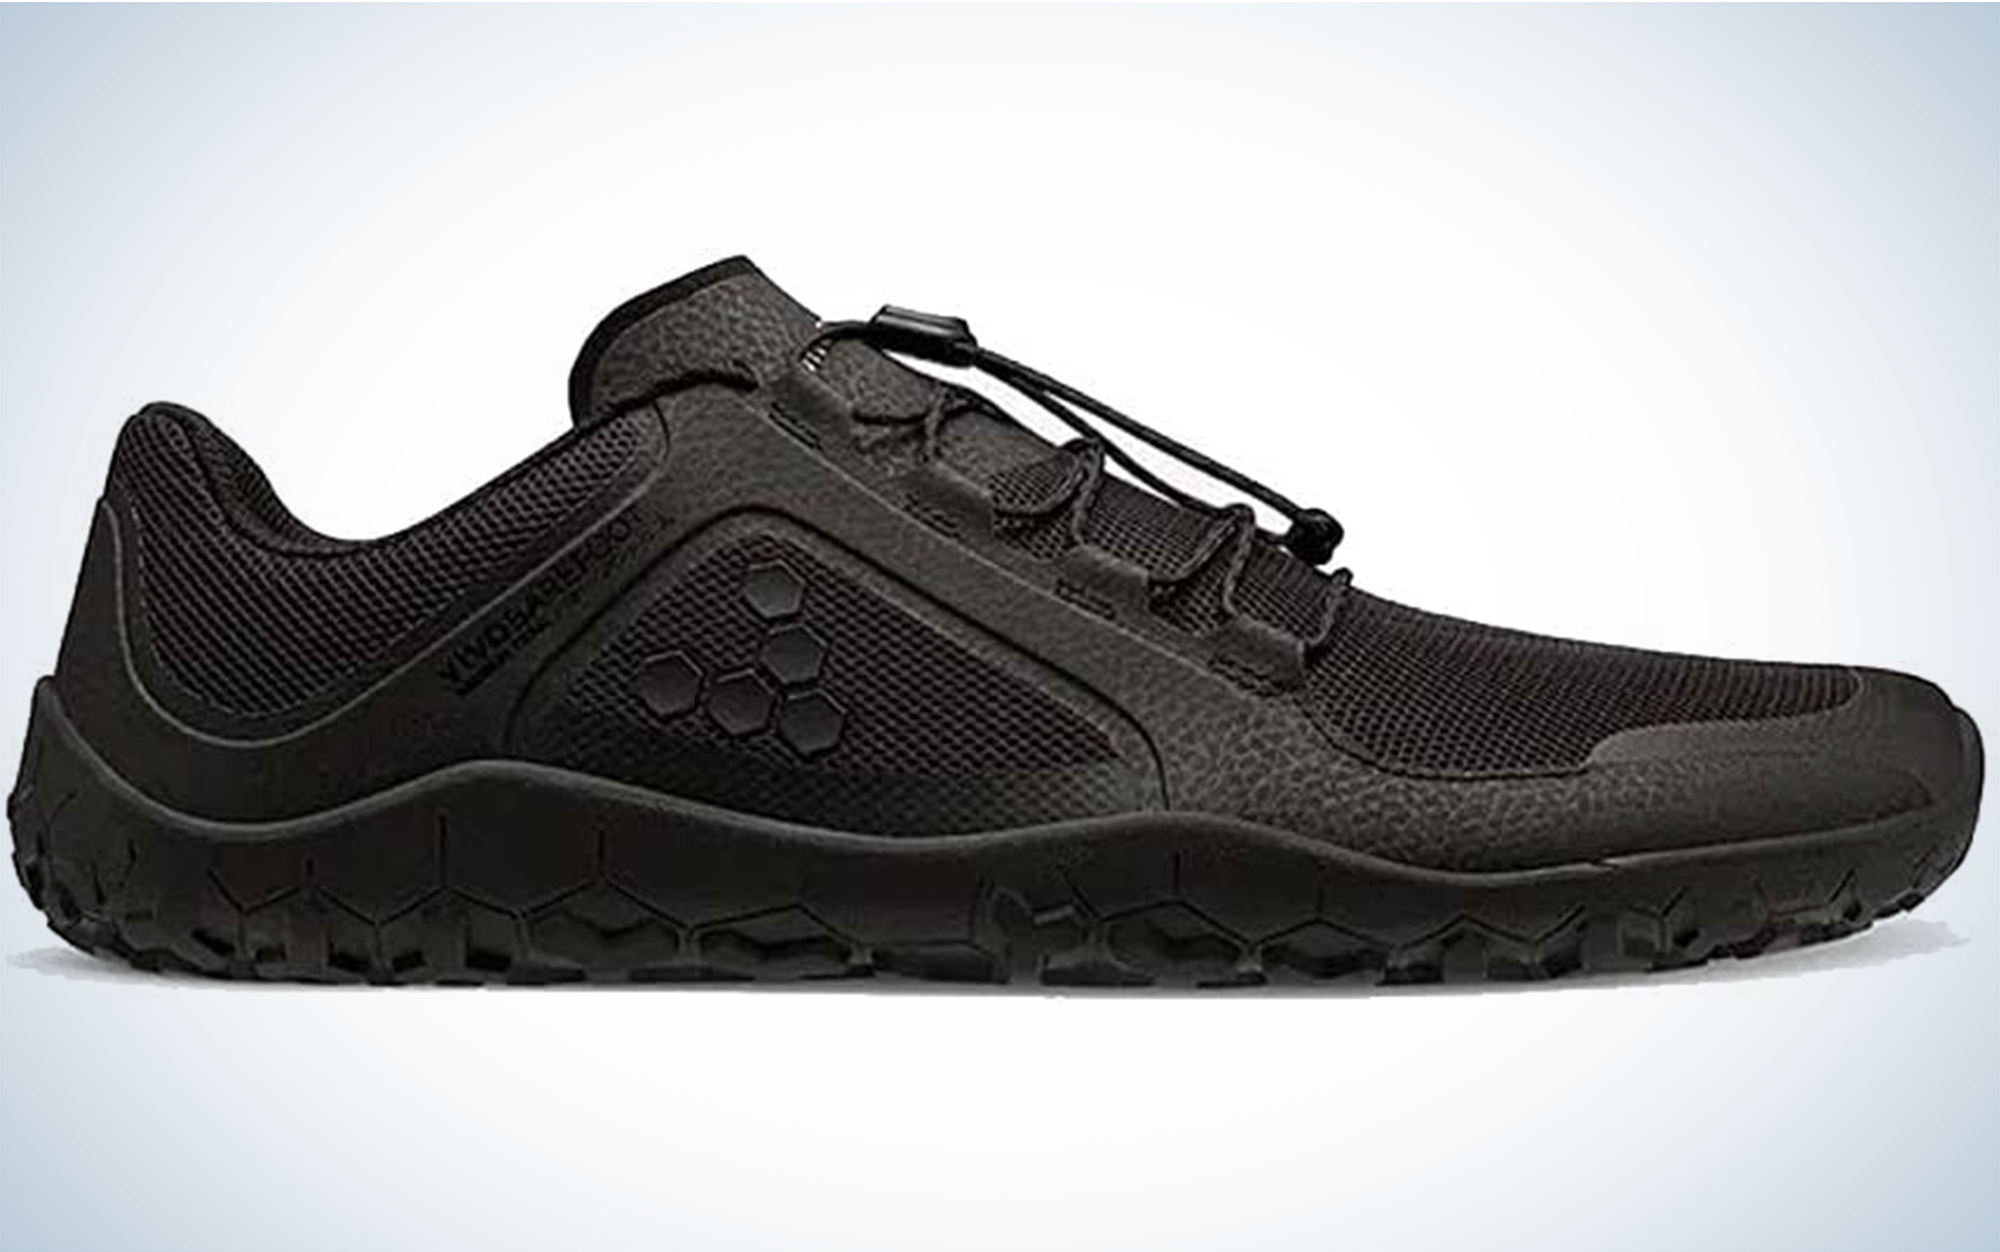 The Vivobarefoot Primus Trail FG II are the best overall minimalist trail runners.